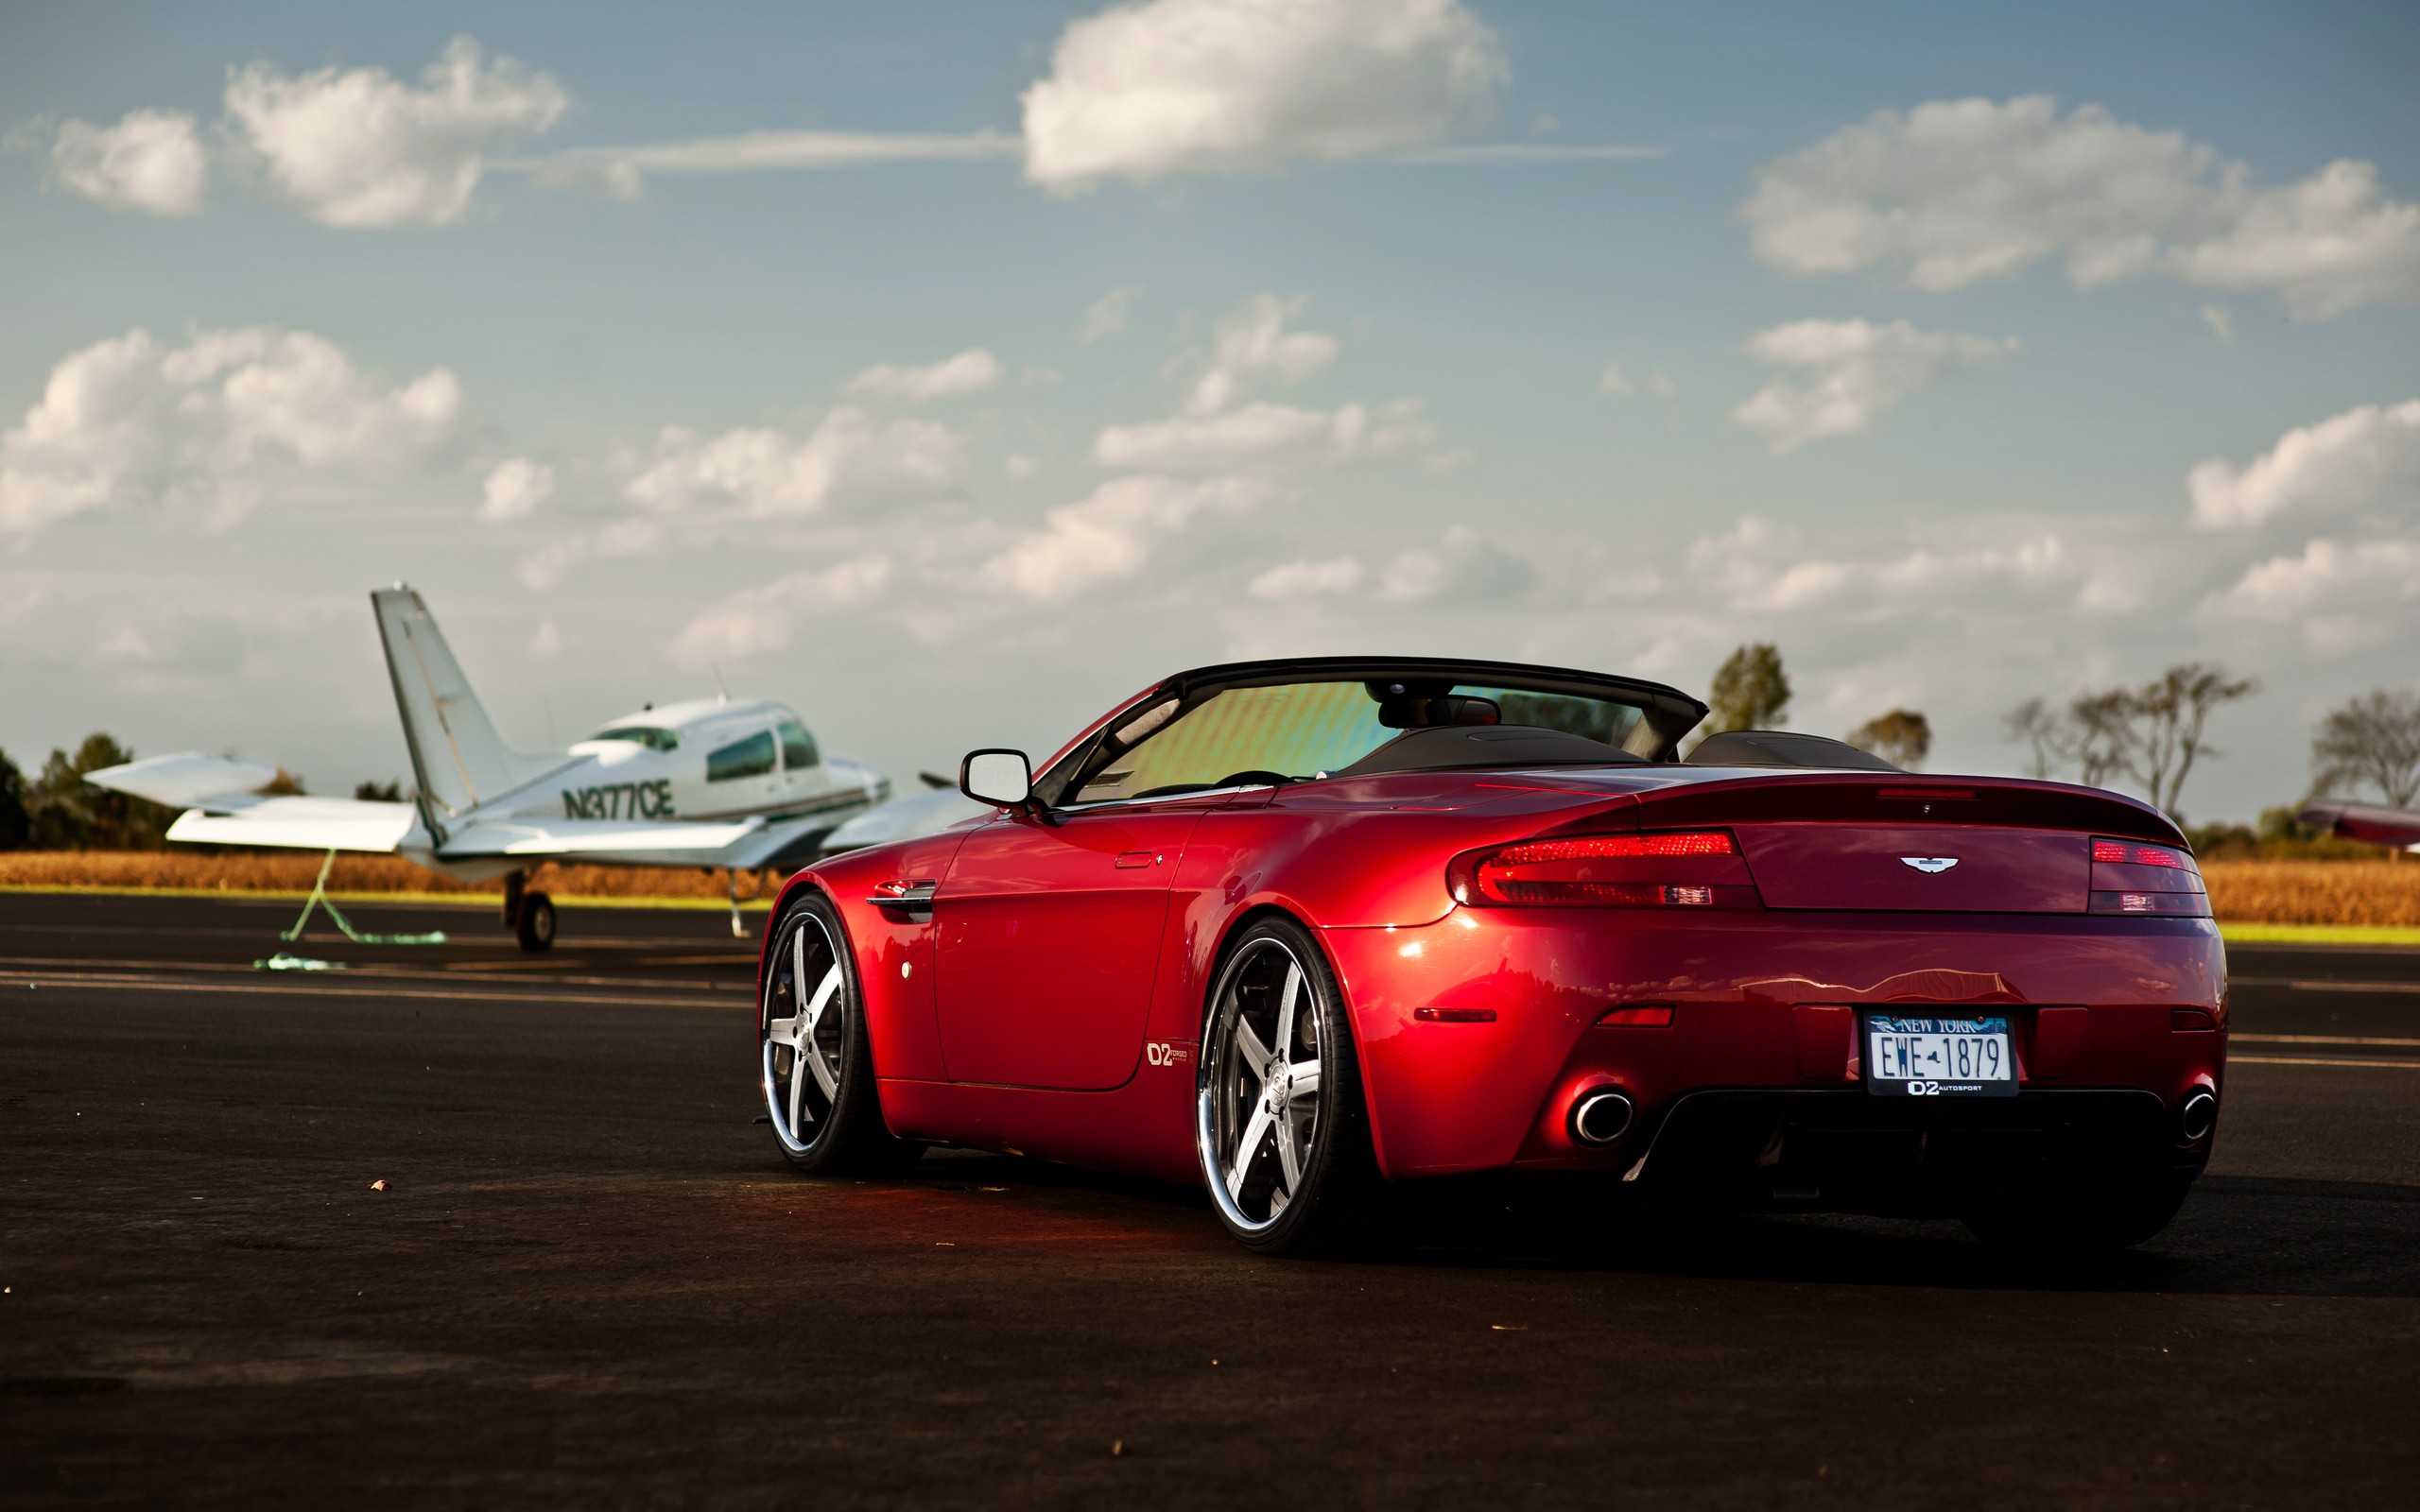 clouds, Cars, Aston, Martin, Runway, Planes, Vehicles, Supercars, Tuning, Wheels, Racing, Sports, Cars, Aston, Martin, Vantage, Luxury, Sport, Cars, Speed, Automobiles Wallpaper